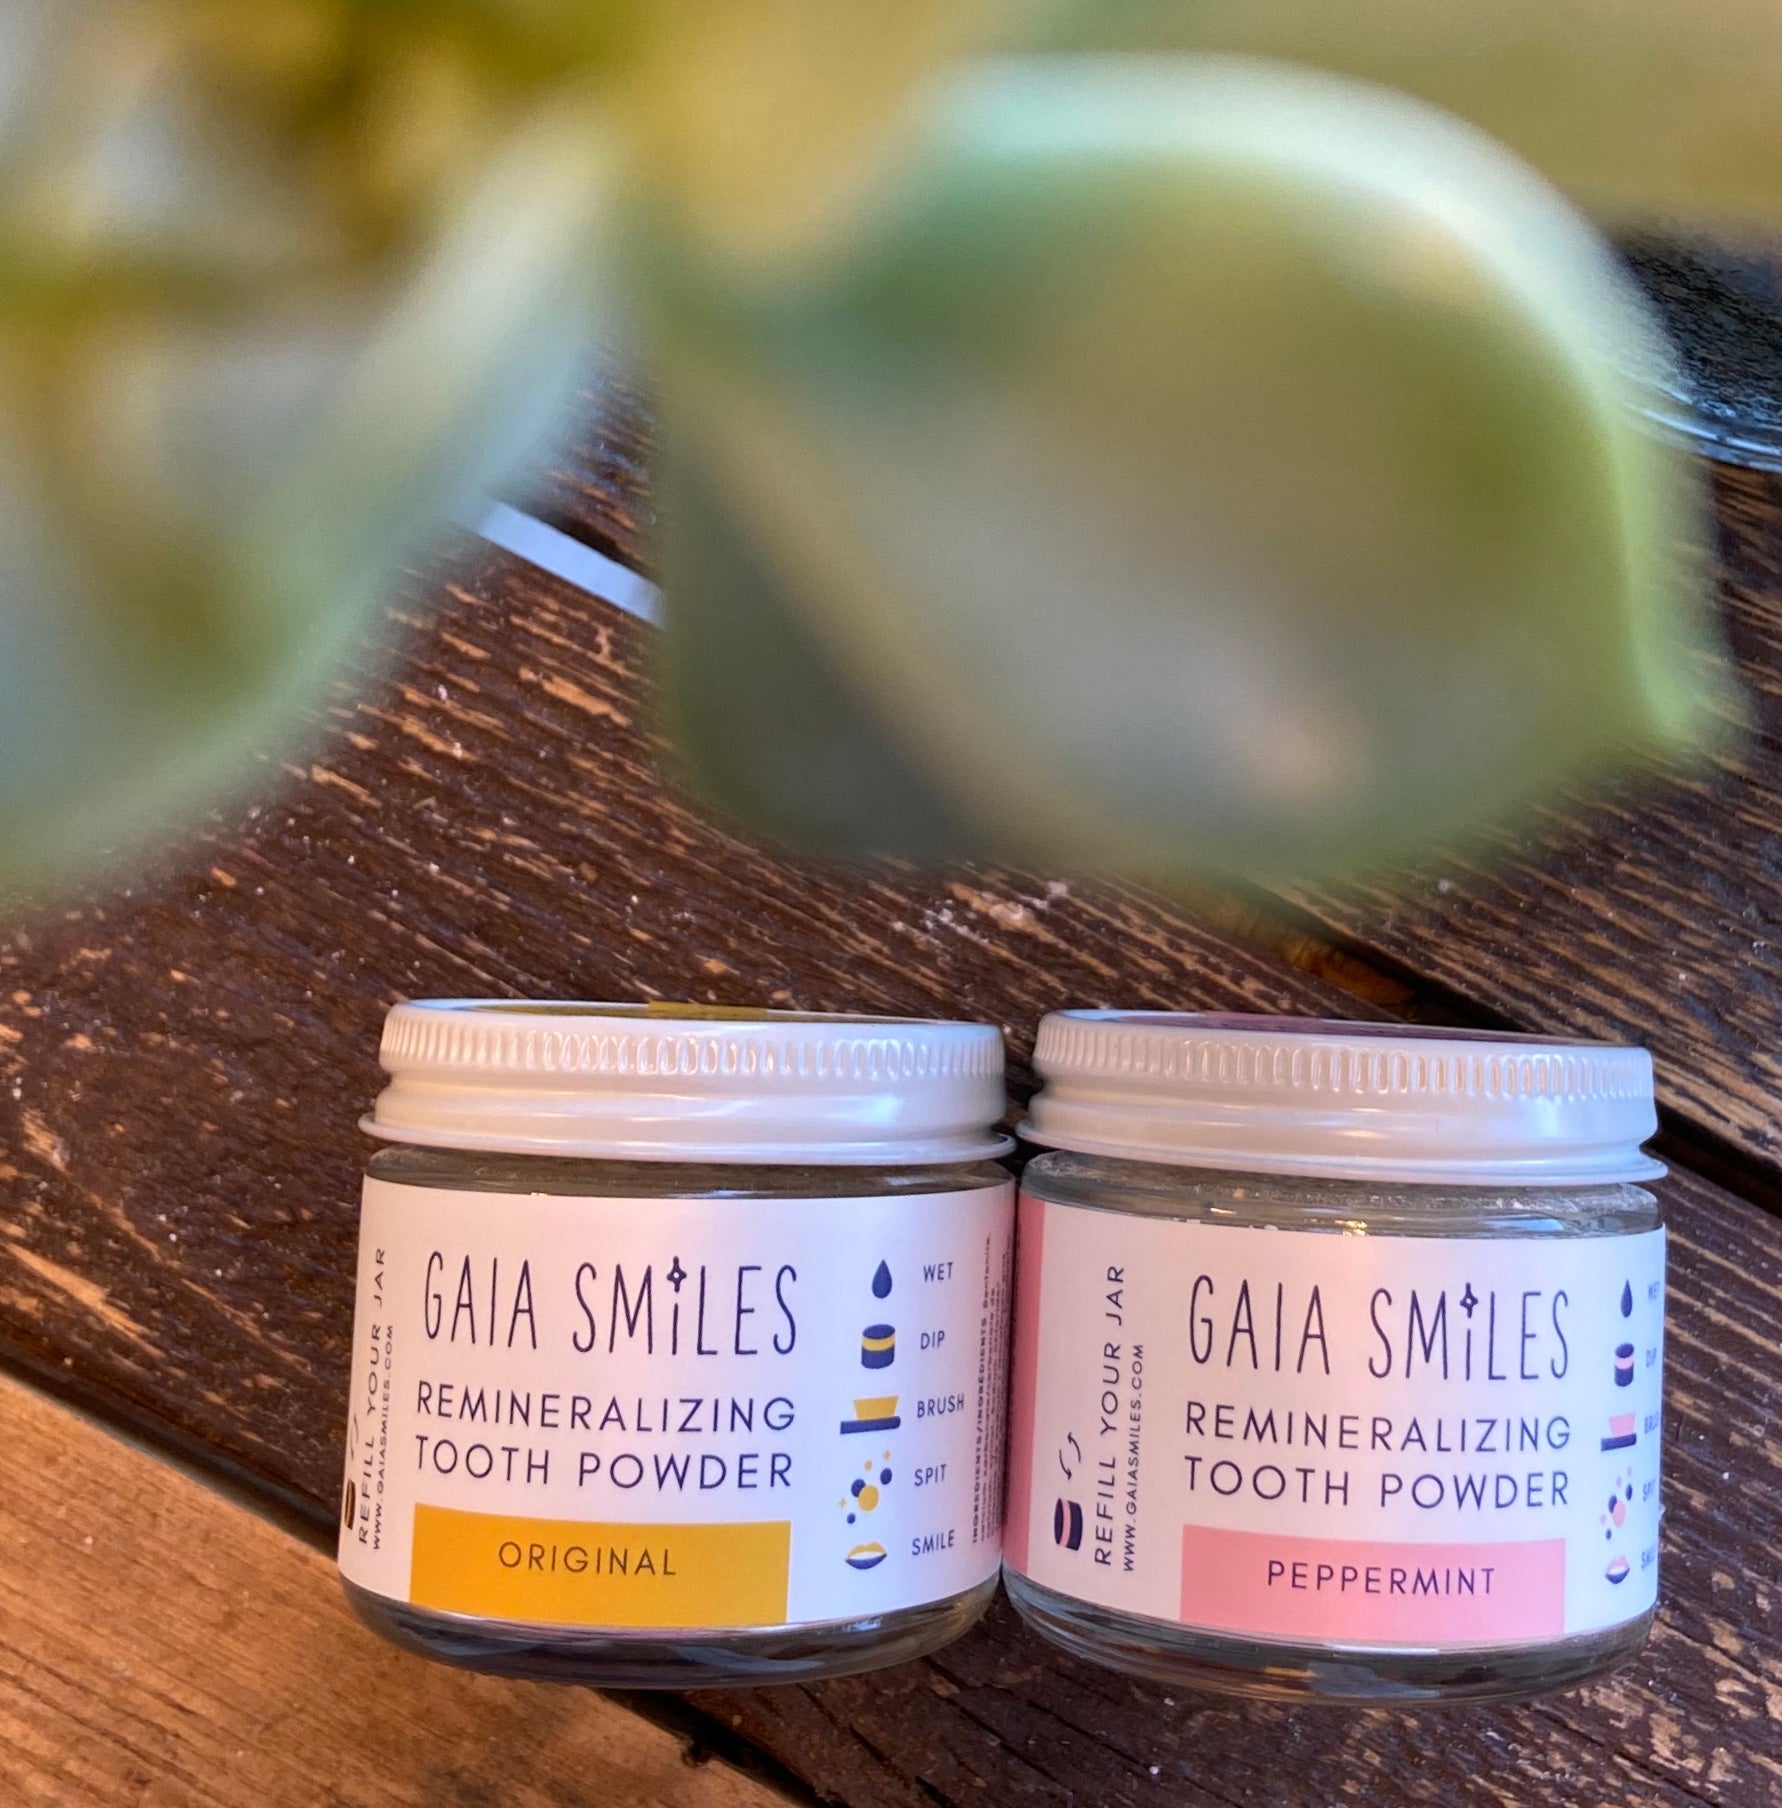 Gaia Smiles Remineralizing Tooth Powder-Peppermint